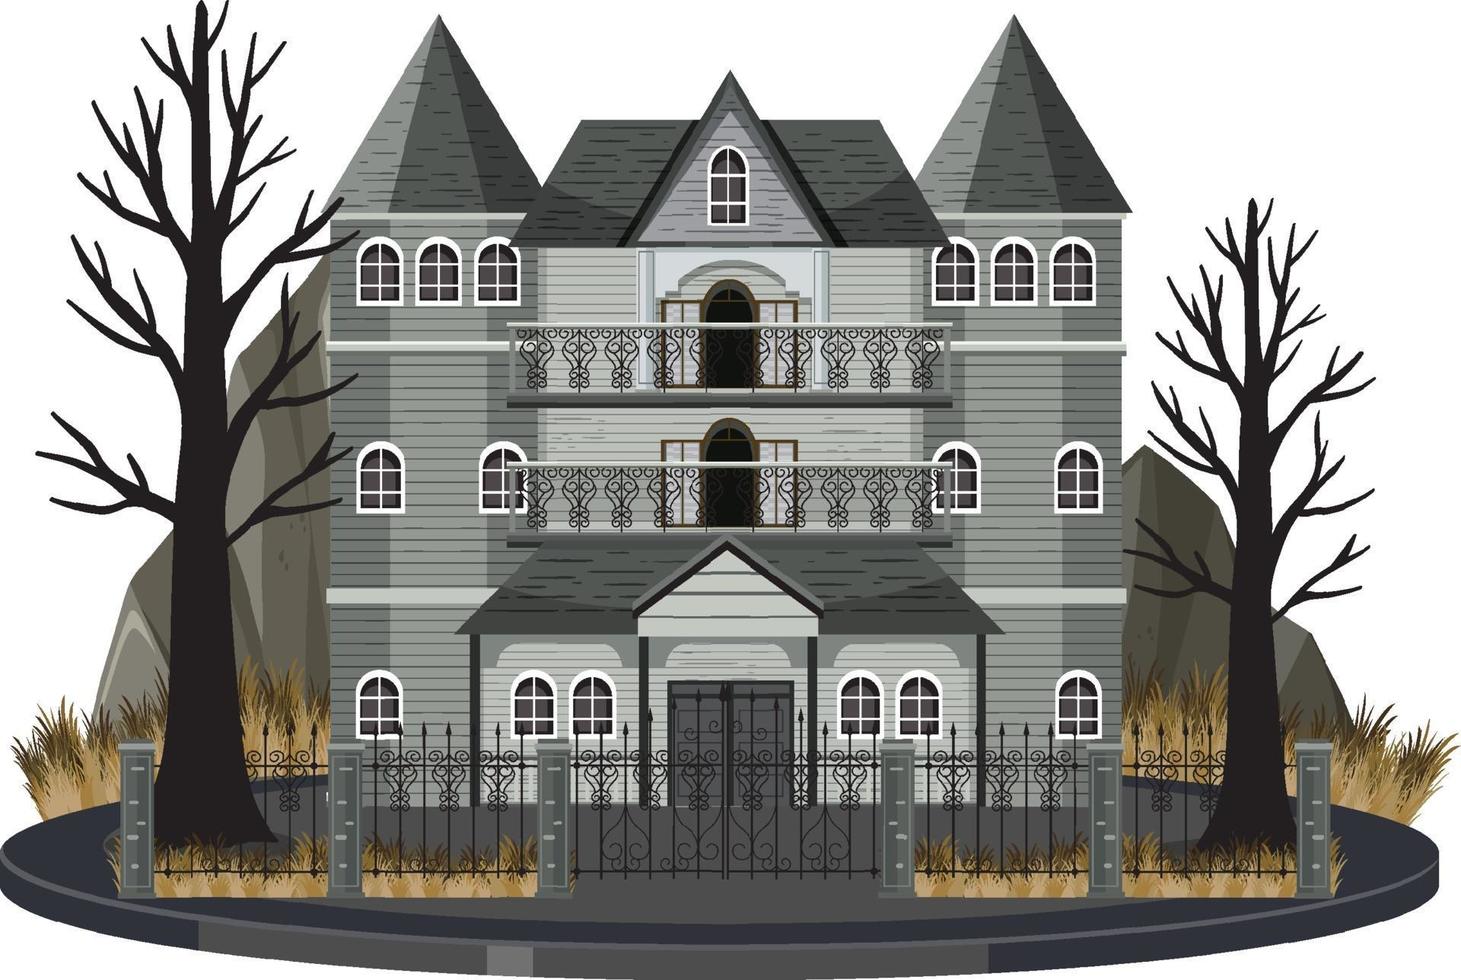 Haunted mansion exterior on white background vector